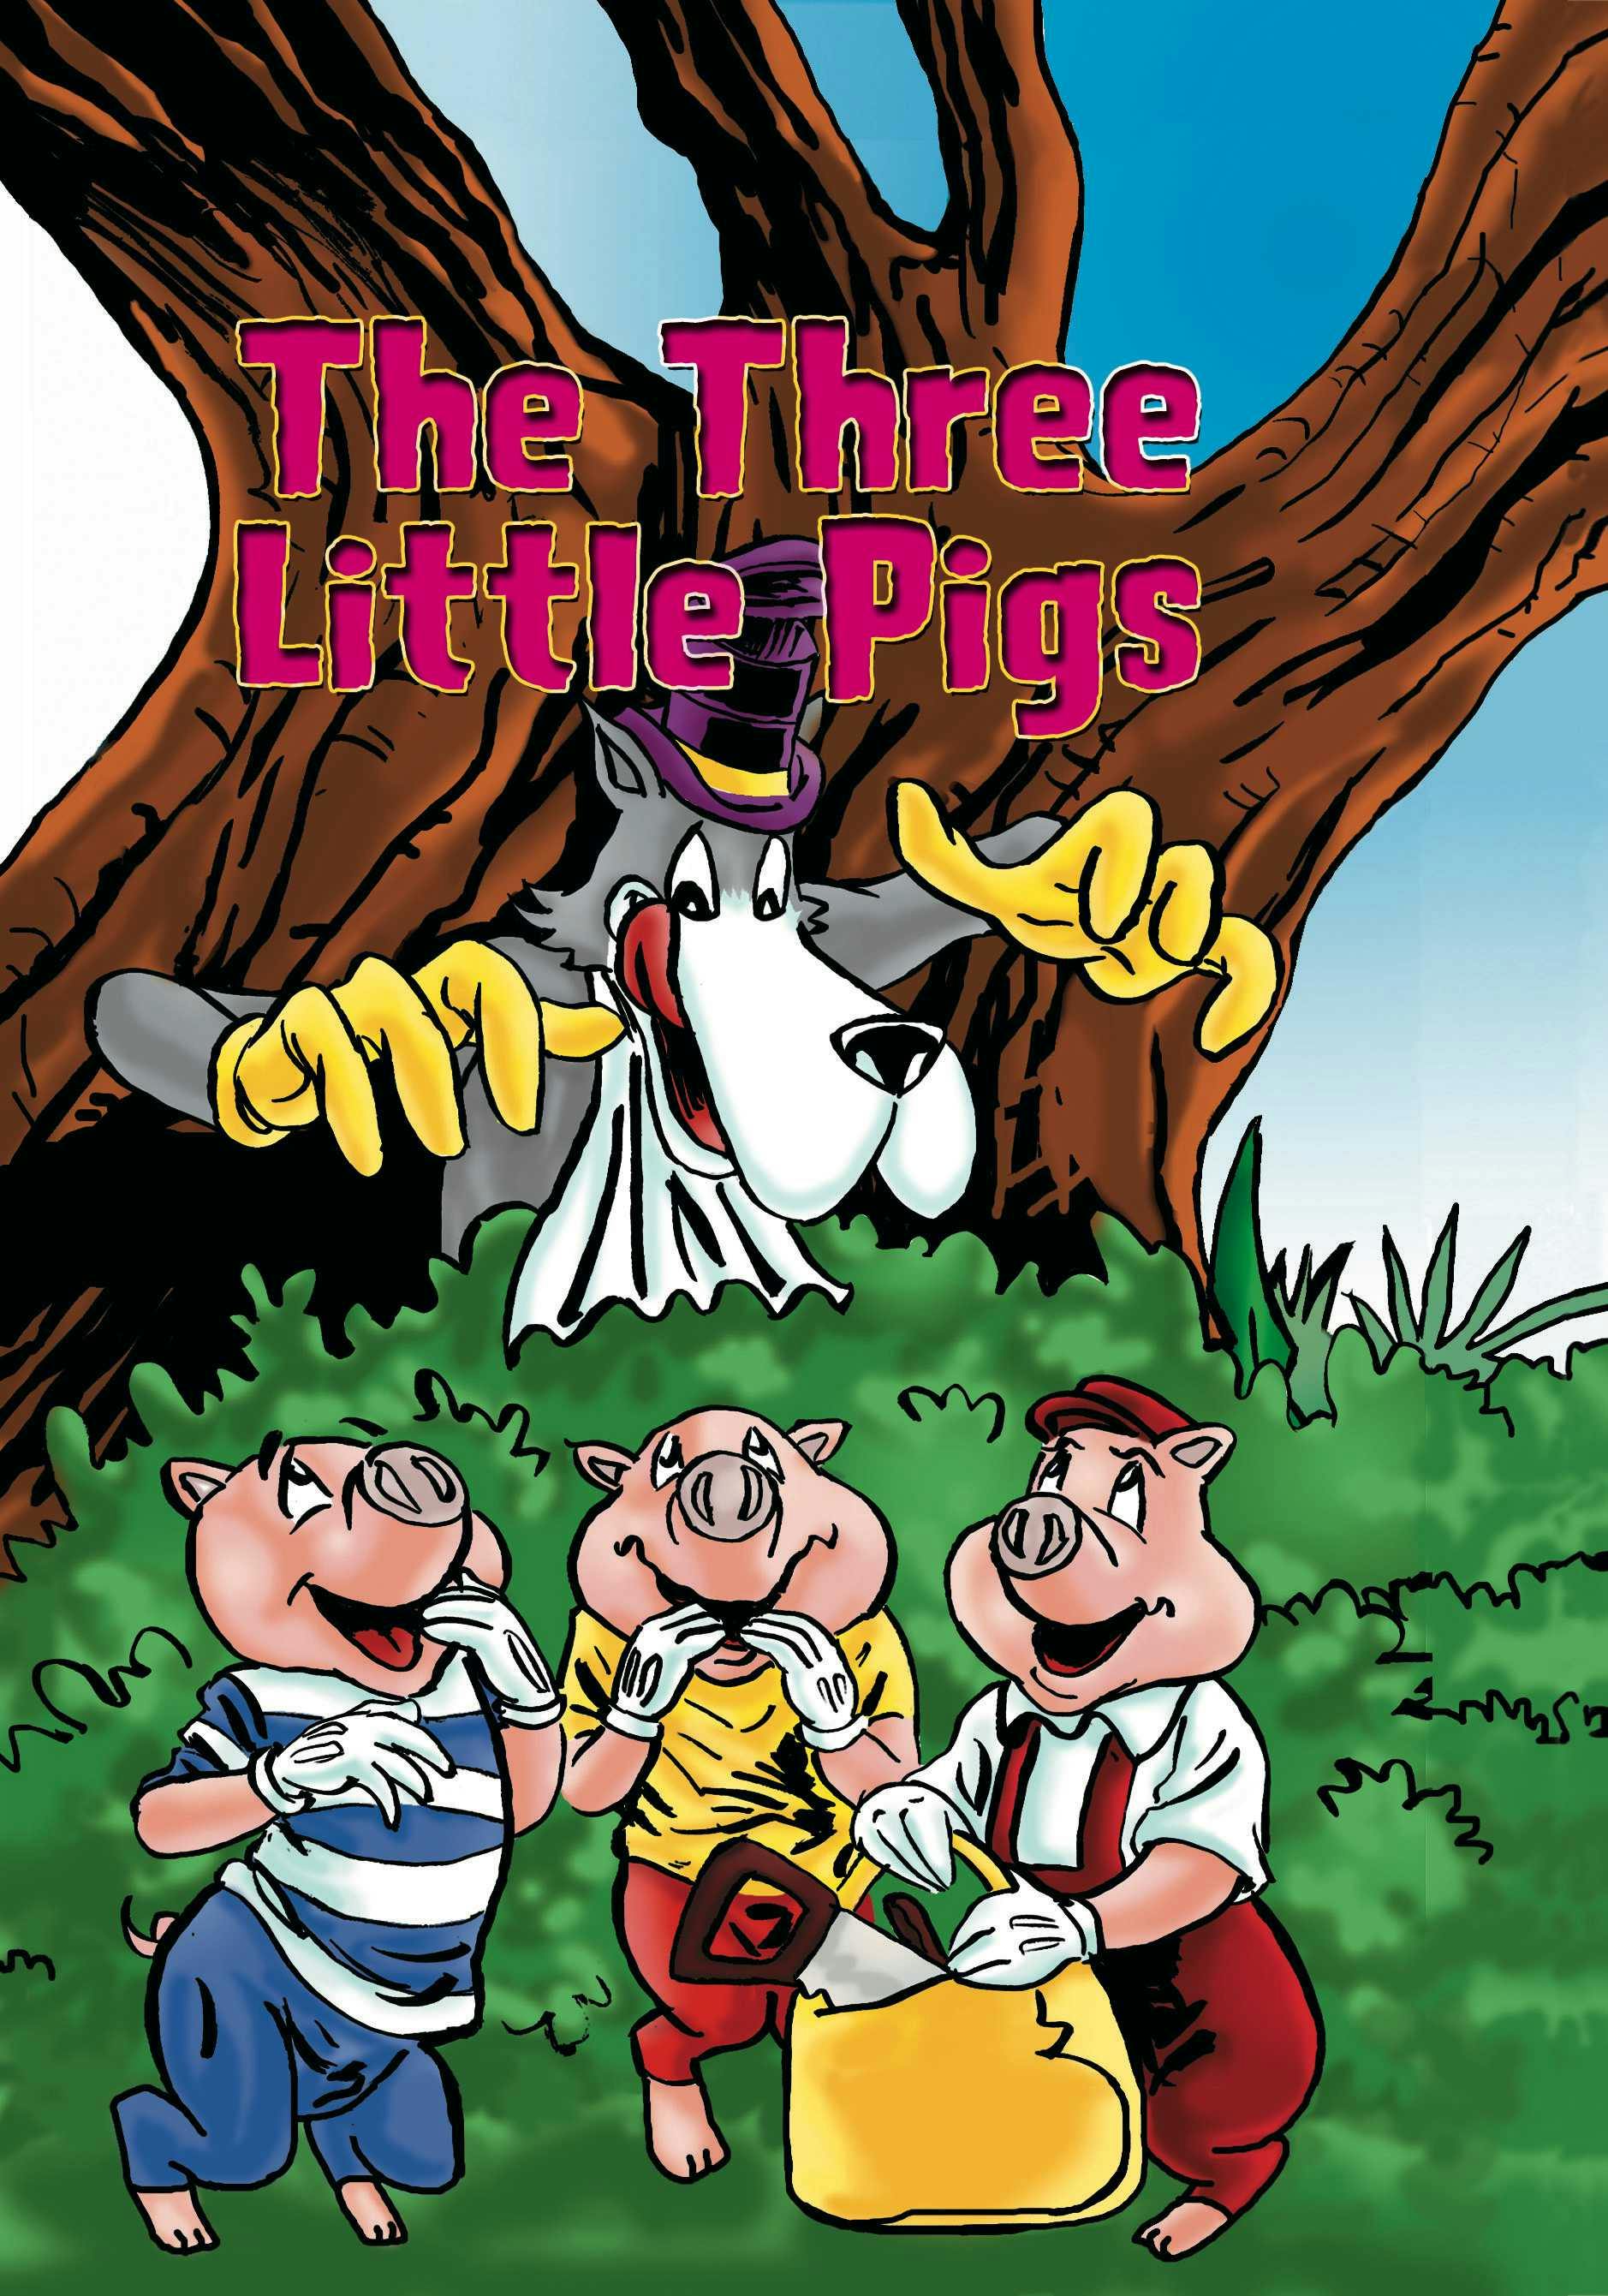 The Three Little Pigs - undefined